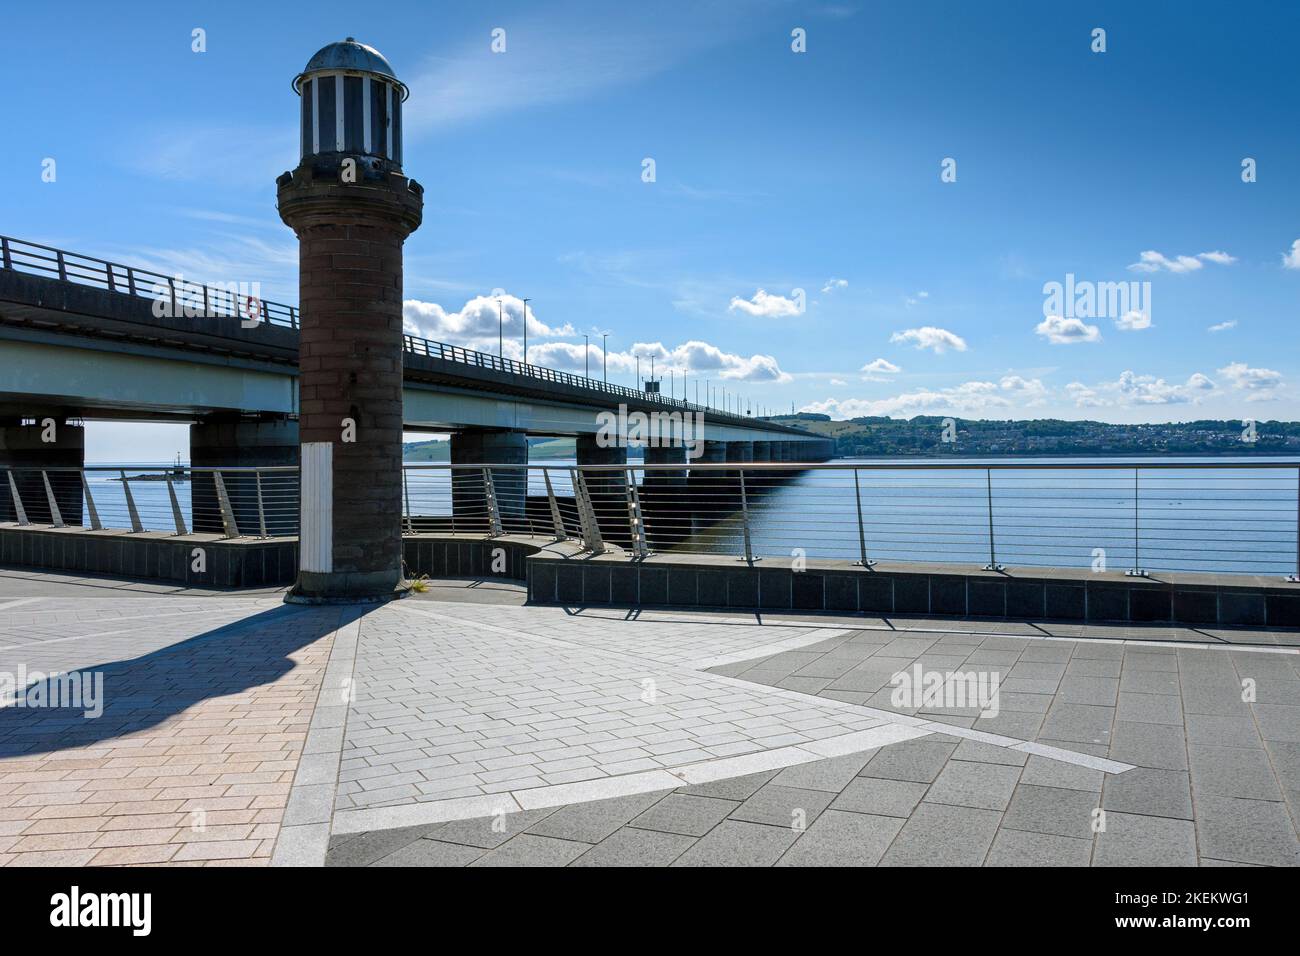 The Tay road bridge from the Telford Beacon, a former harbour light moved from the King William IV dock.  At Black Watch Parade, Dundee, Scotland, UK Stock Photo